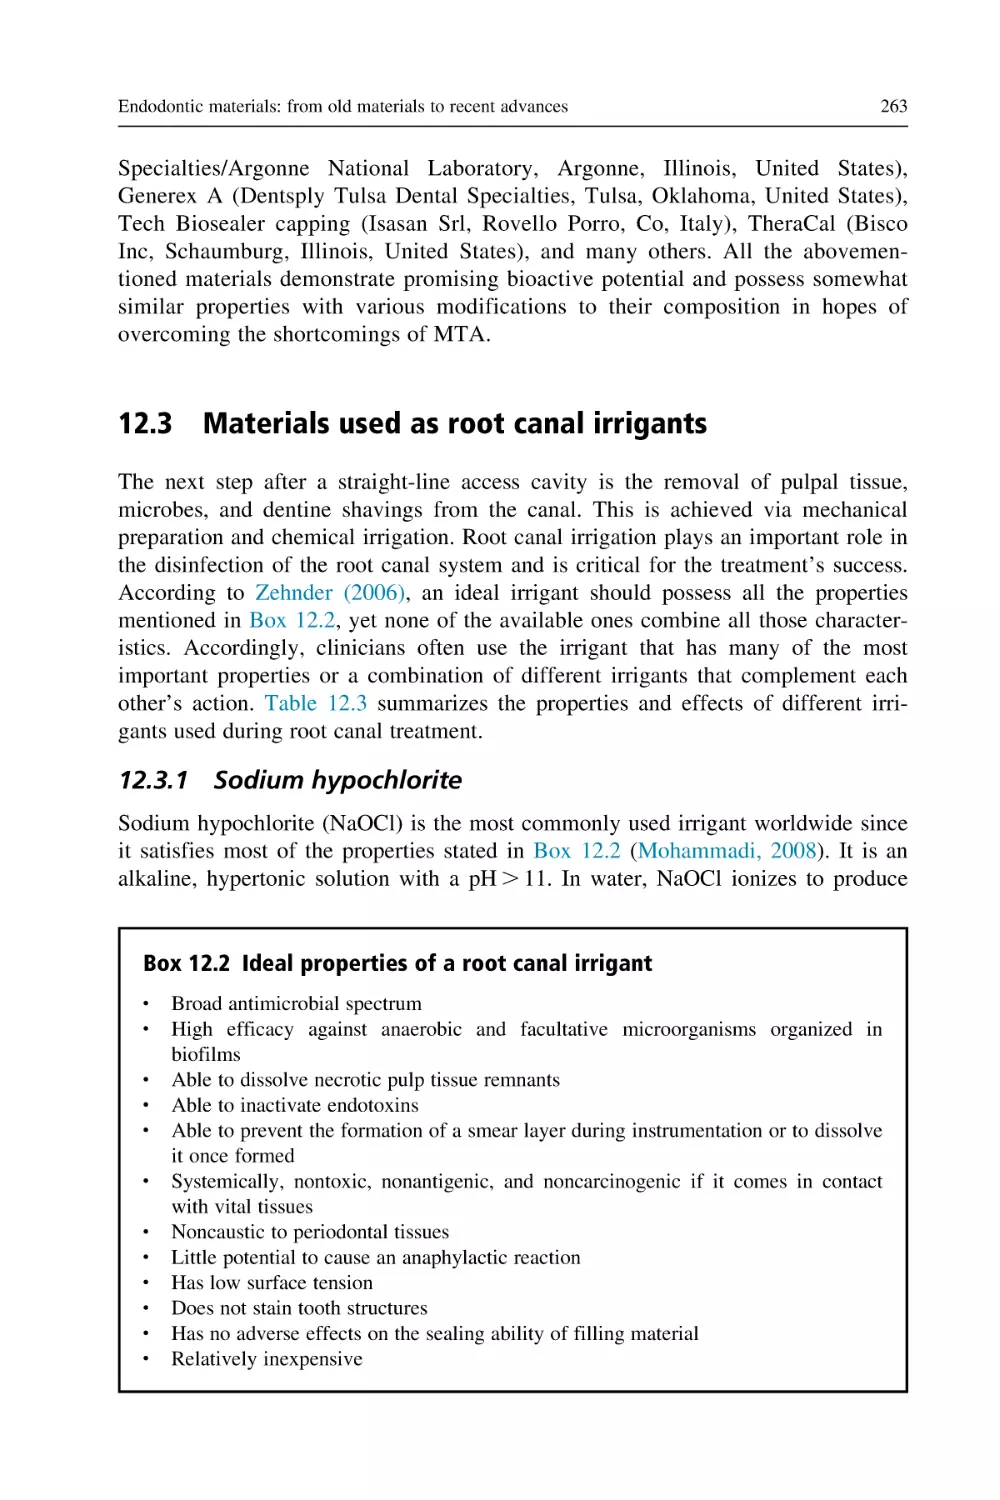 12.3 Materials used as root canal irrigants
12.3.1 Sodium hypochlorite